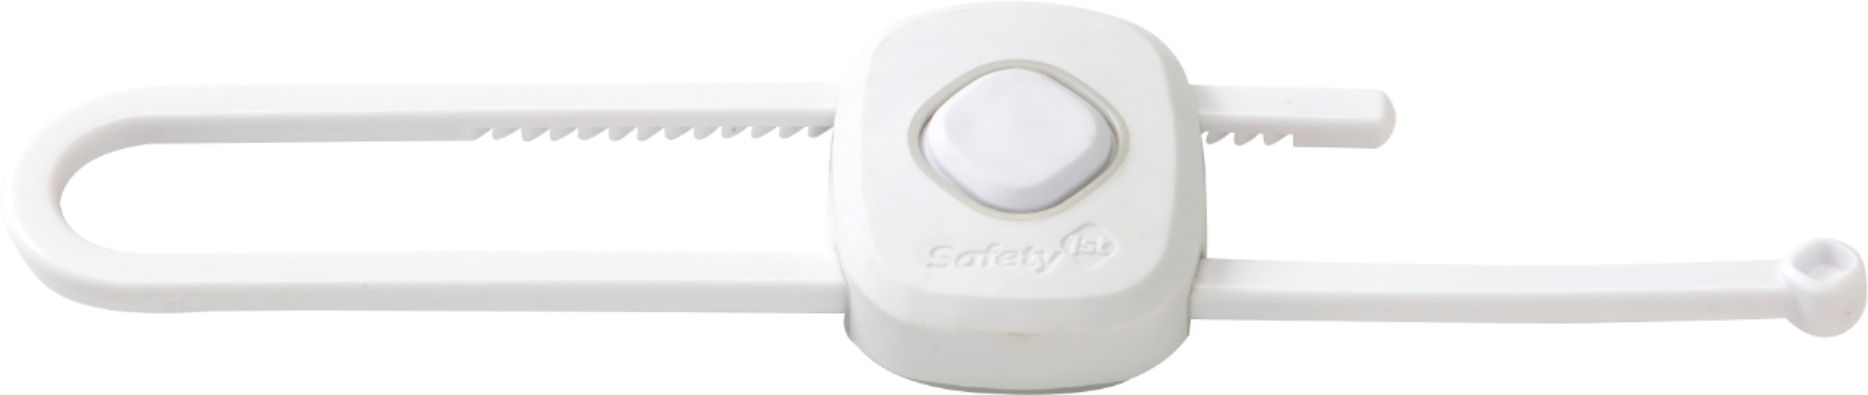 Angle View: Safety 1st - OutSmart™ Slide Lock - White